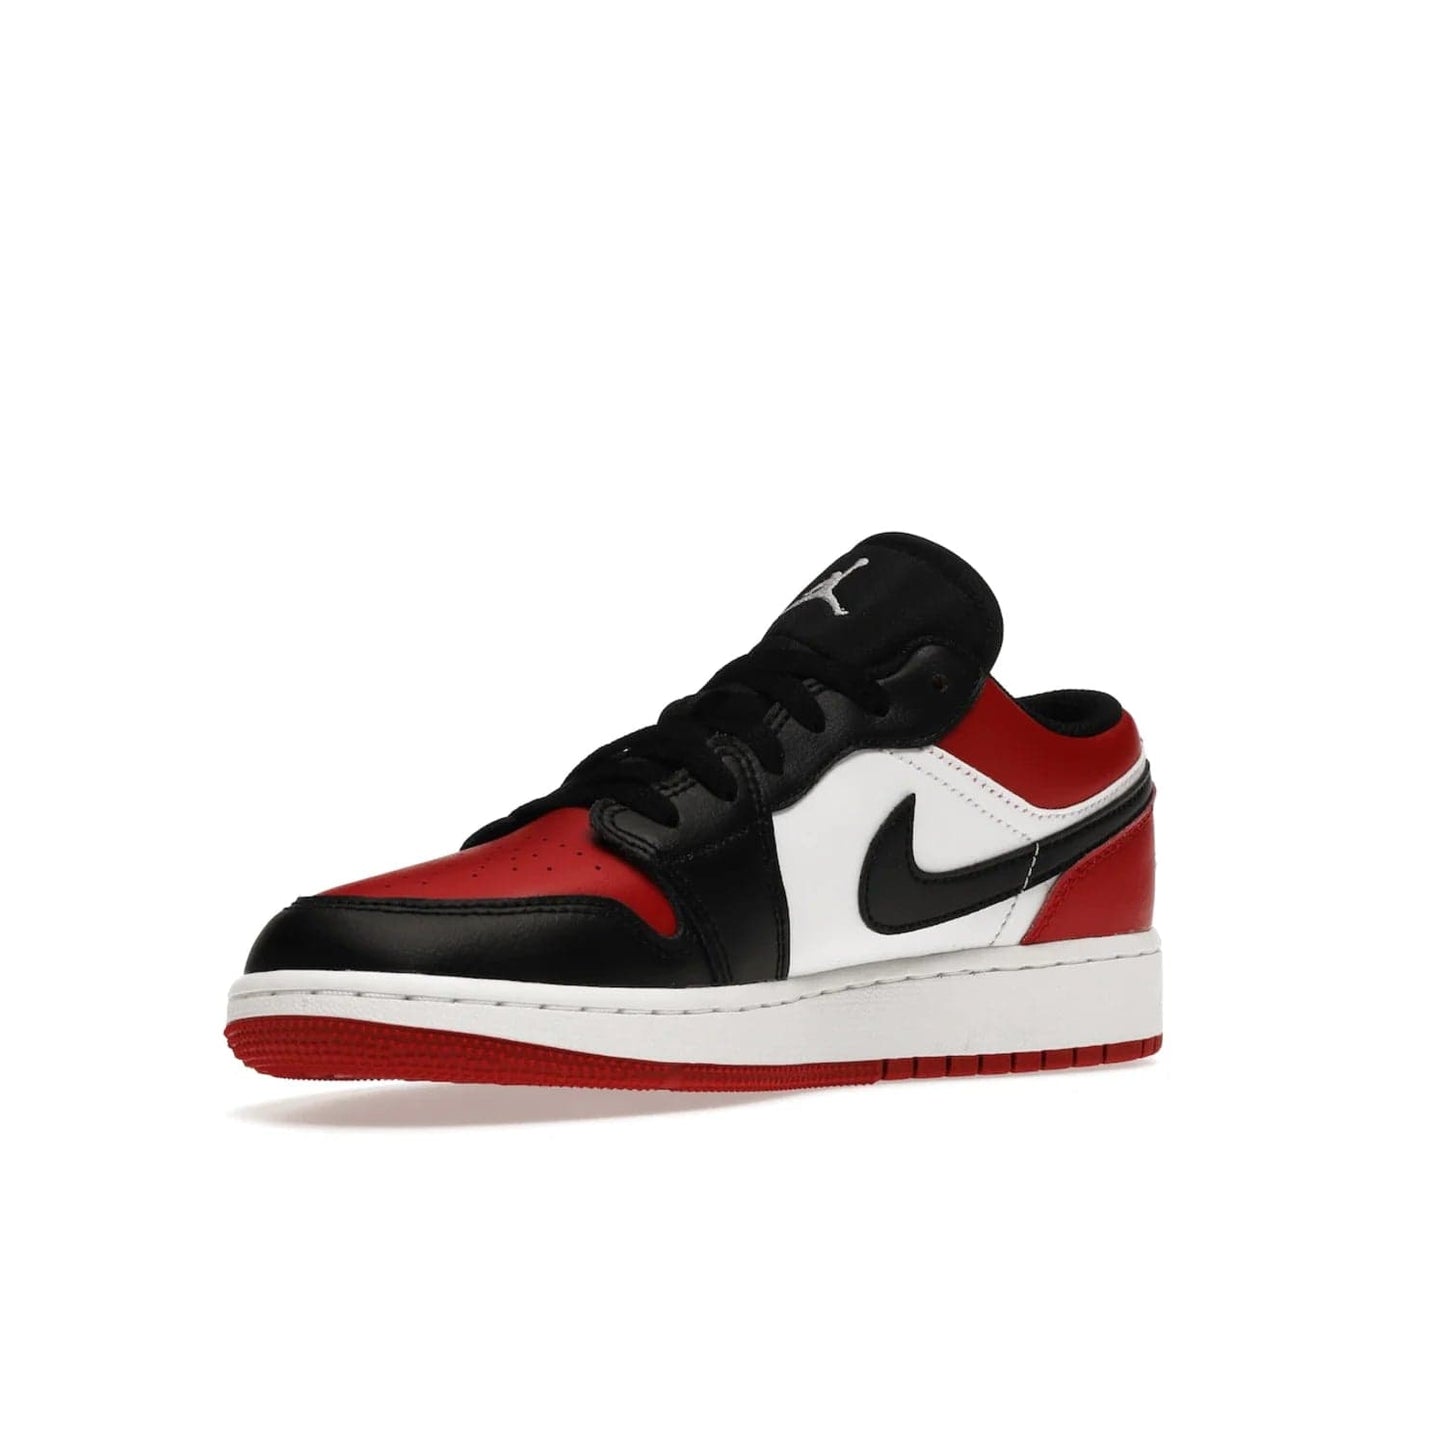 Jordan 1 Low Bred Toe (GS) - Image 15 - Only at www.BallersClubKickz.com - #
Iconic sneaker from Jordan brand with classic colorway, unique detailing & Air Jordan Wings logo. Step into the shoes of the greats with the Jordan 1 Low Bred Toe GS!